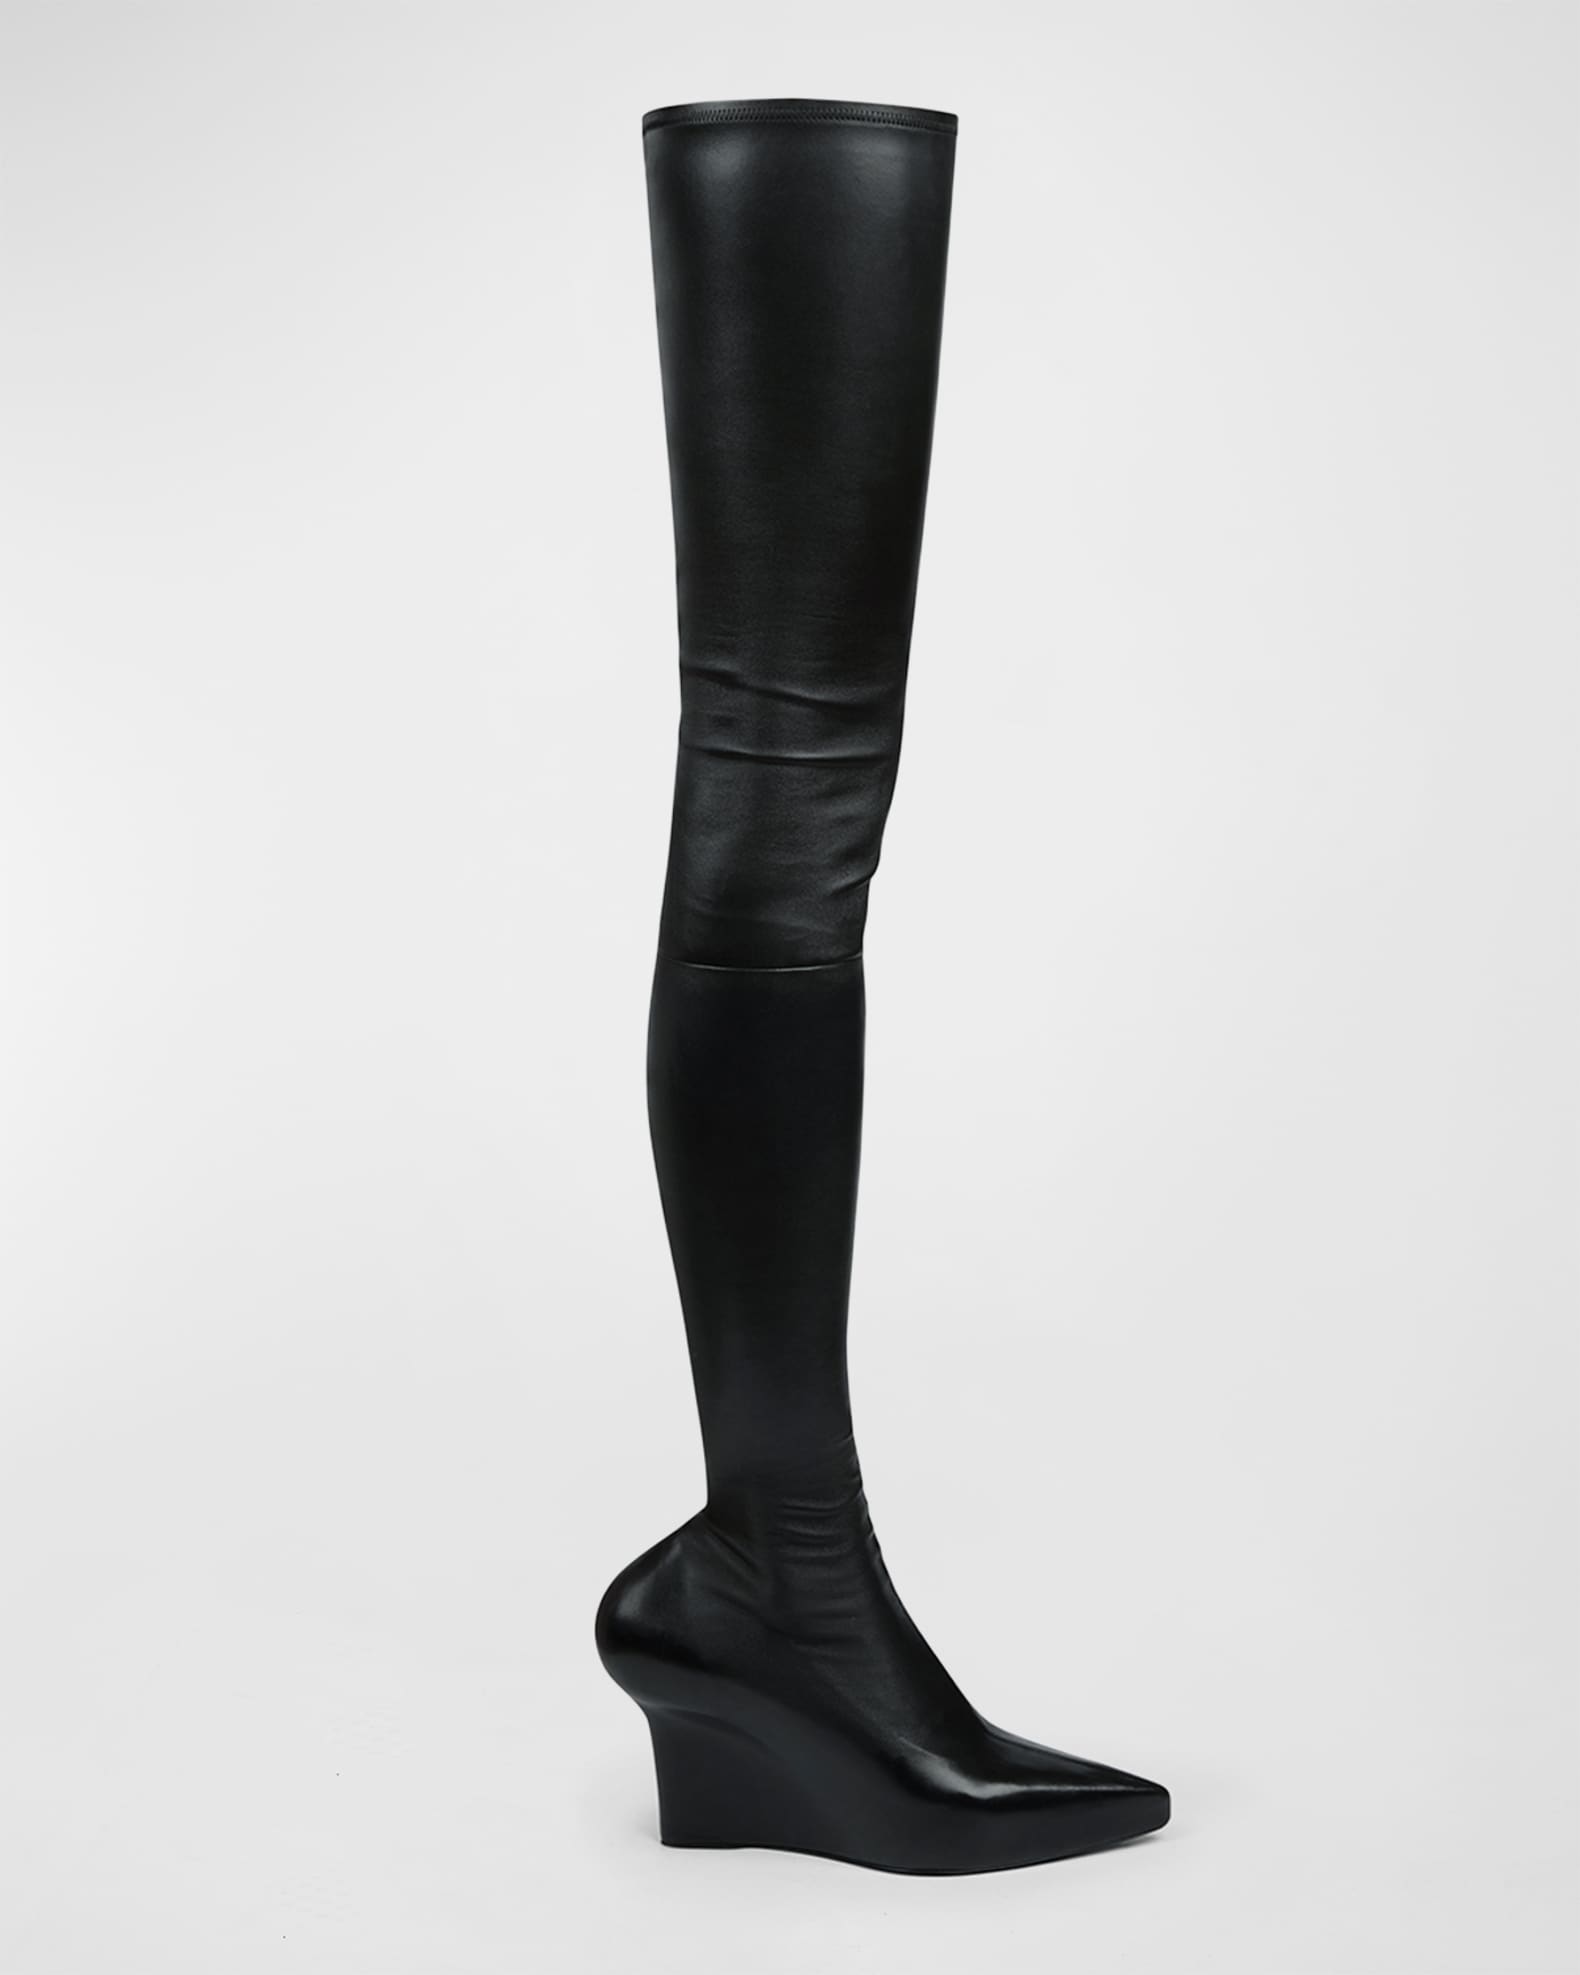 Givenchy Show Stretch Over-The-Knee Boots | Neiman Marcus